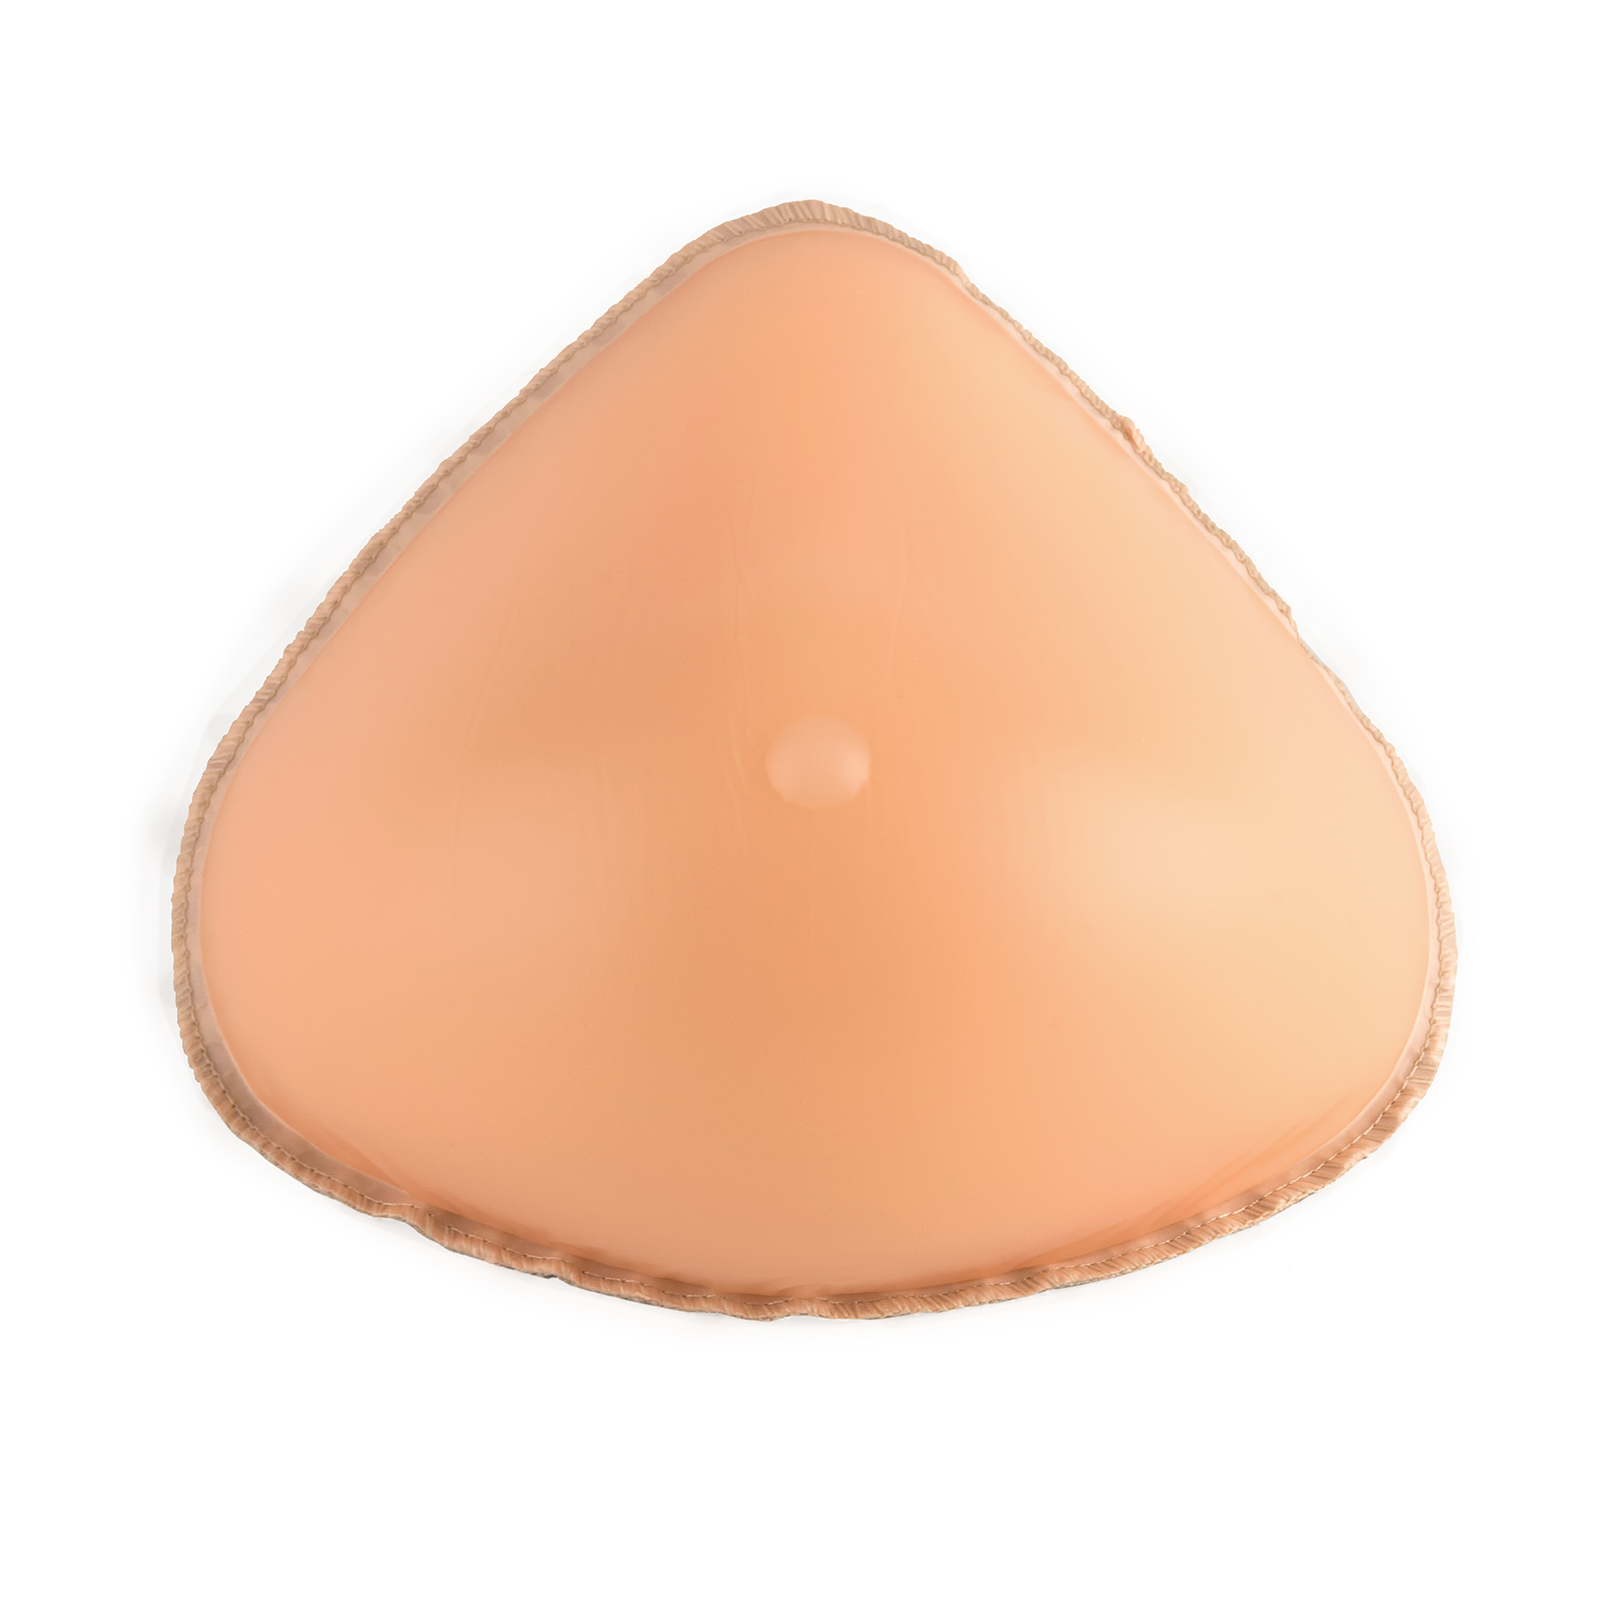 https://www.mywhb.com/uploads/ecommerce/new-day-natural-clout-light-mvt-silicone-breast-form-front-32.jpg?v=1701890922